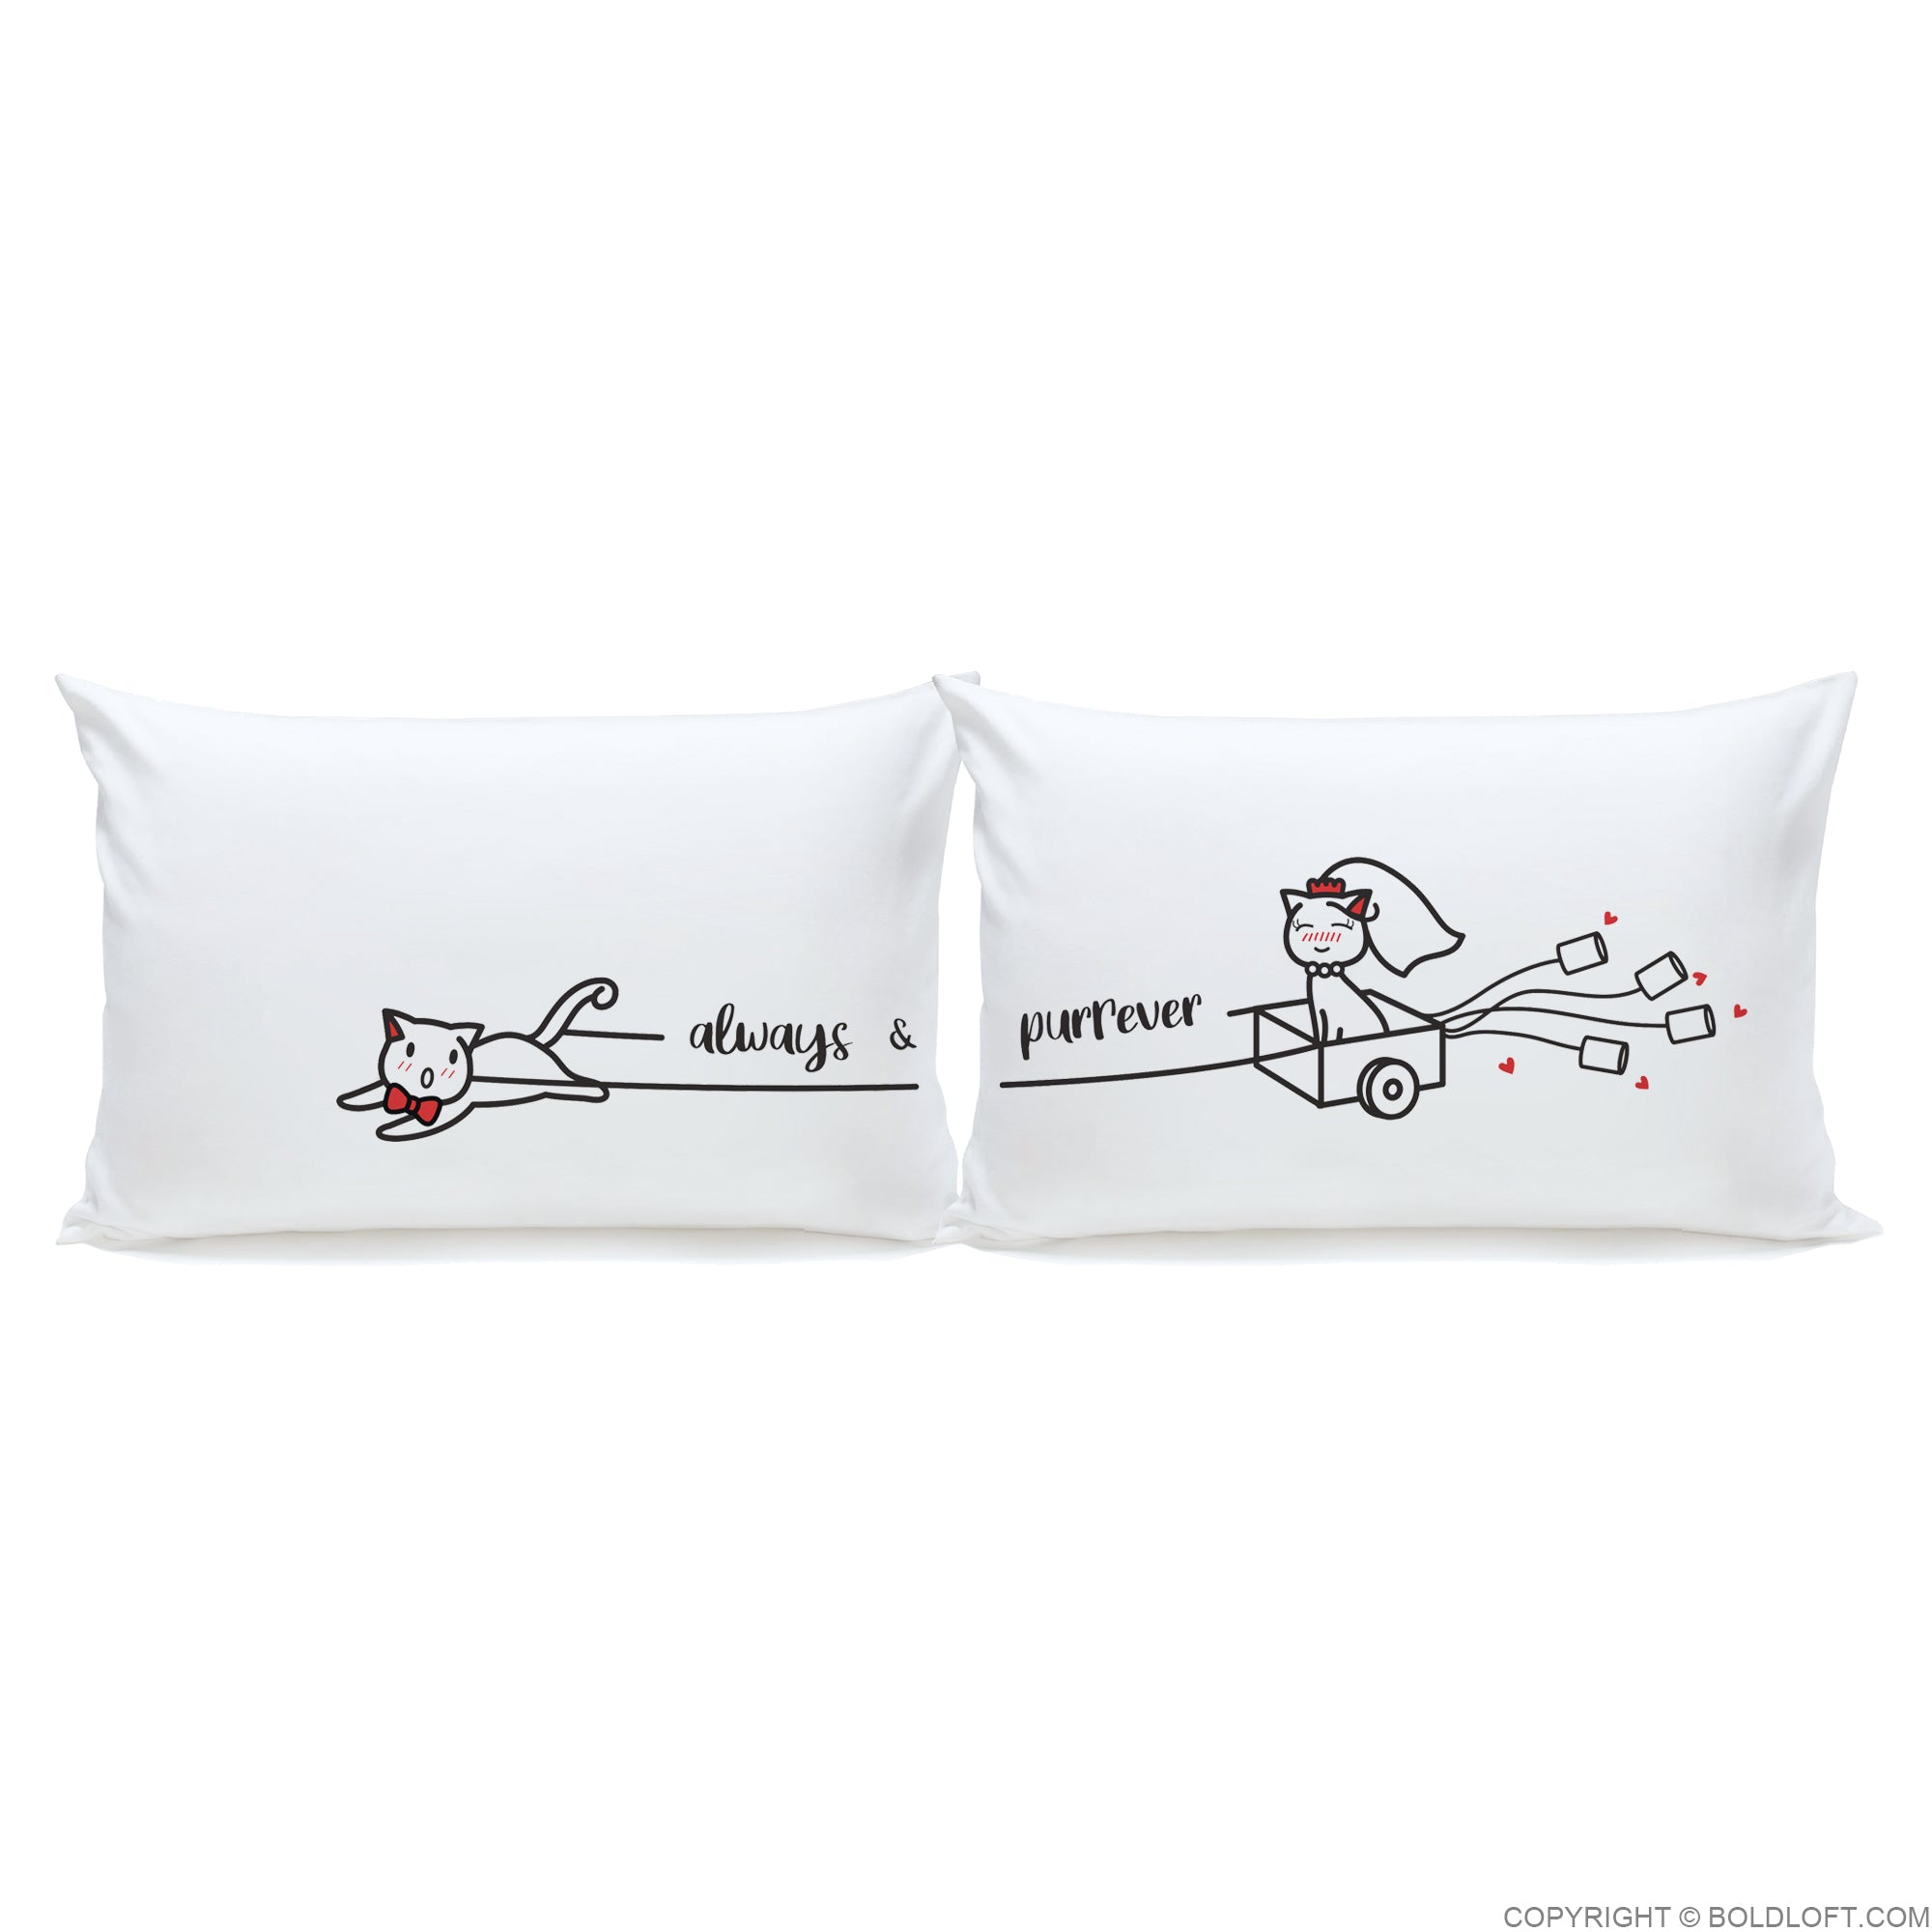 boldloft always &amp; purrever cat couple pillowcases cat lover gifts cat themed wedding gifts